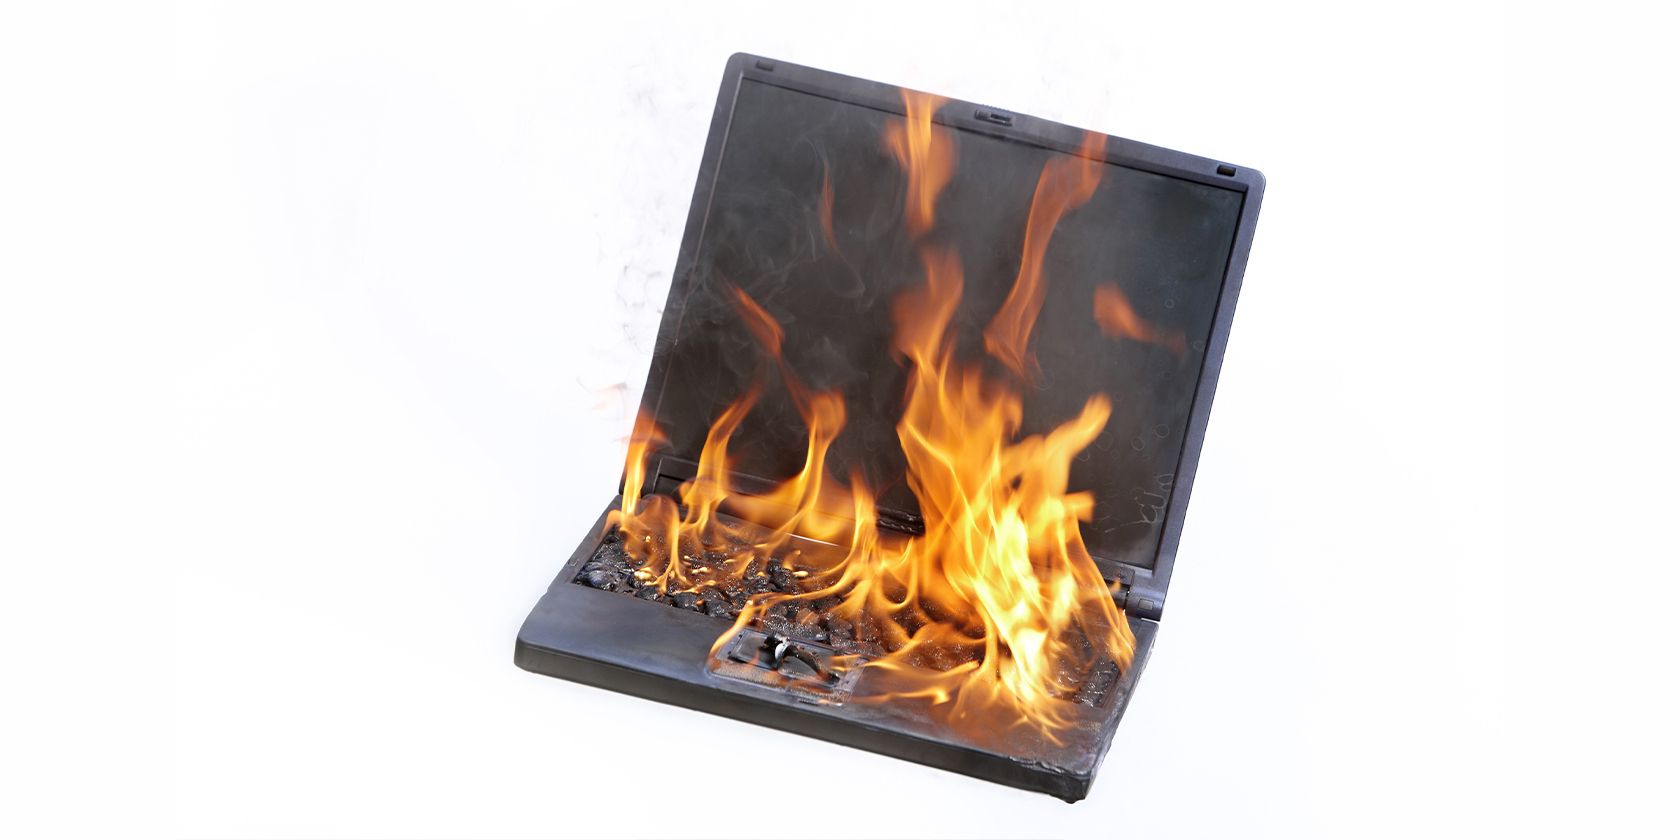 An Old Burning Computer